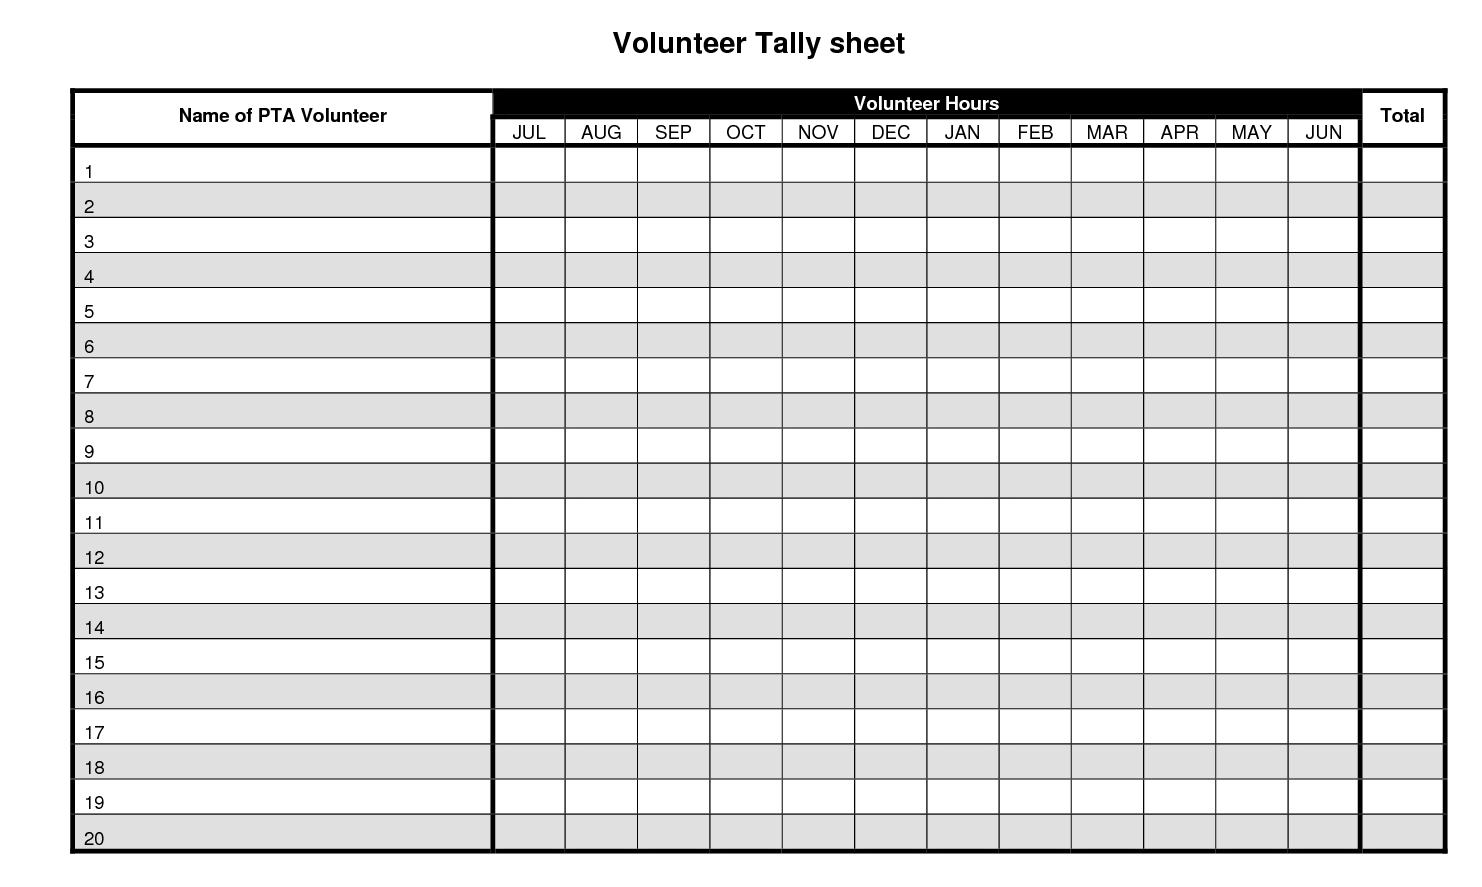 Sign Up Sheet Template With Time Slot - One Platform For